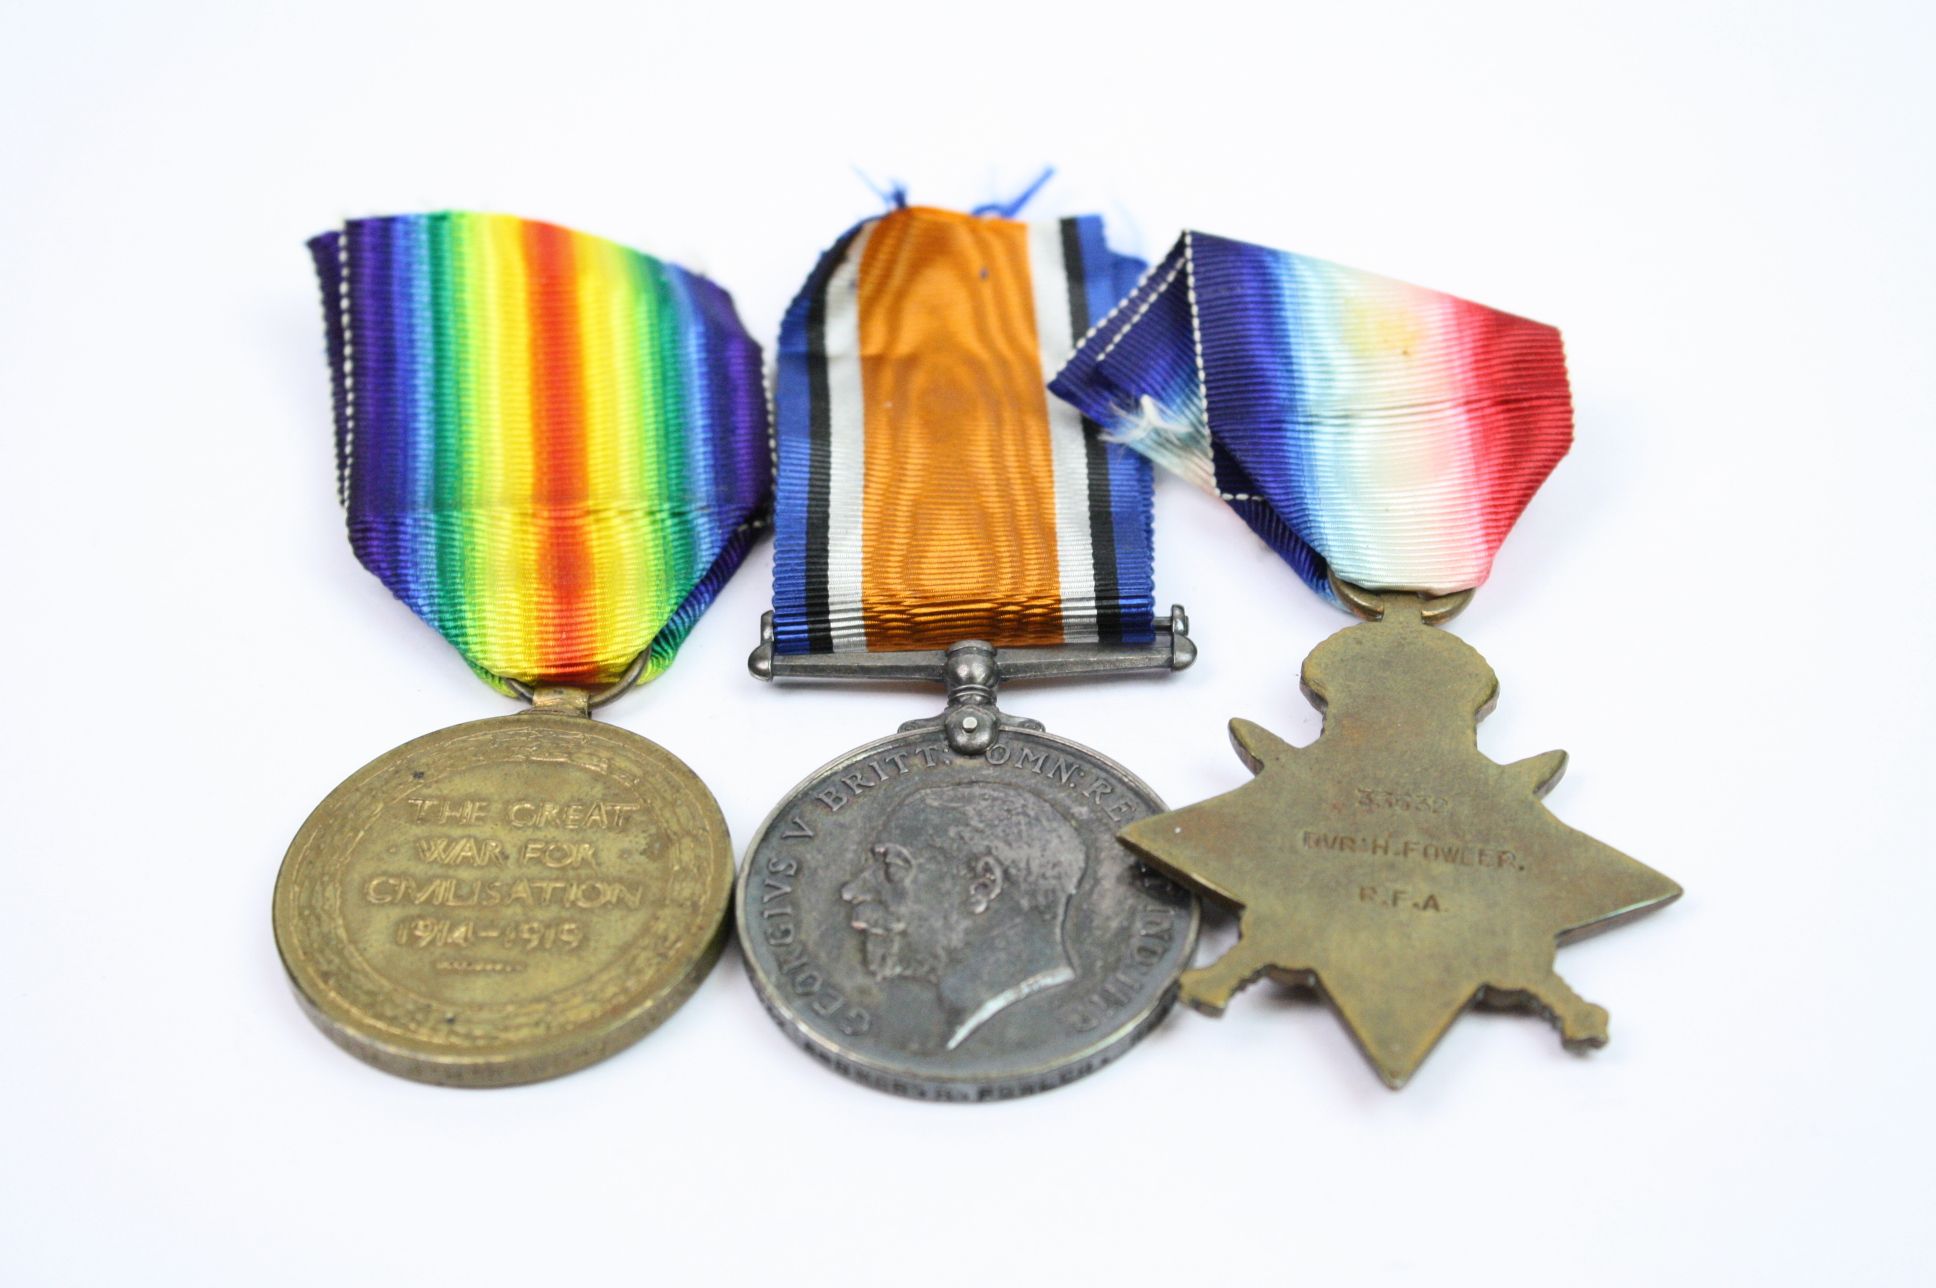 A Full Size British World War One Medal Trio To Include The British War Medal, The Victory Medal And - Image 8 of 13